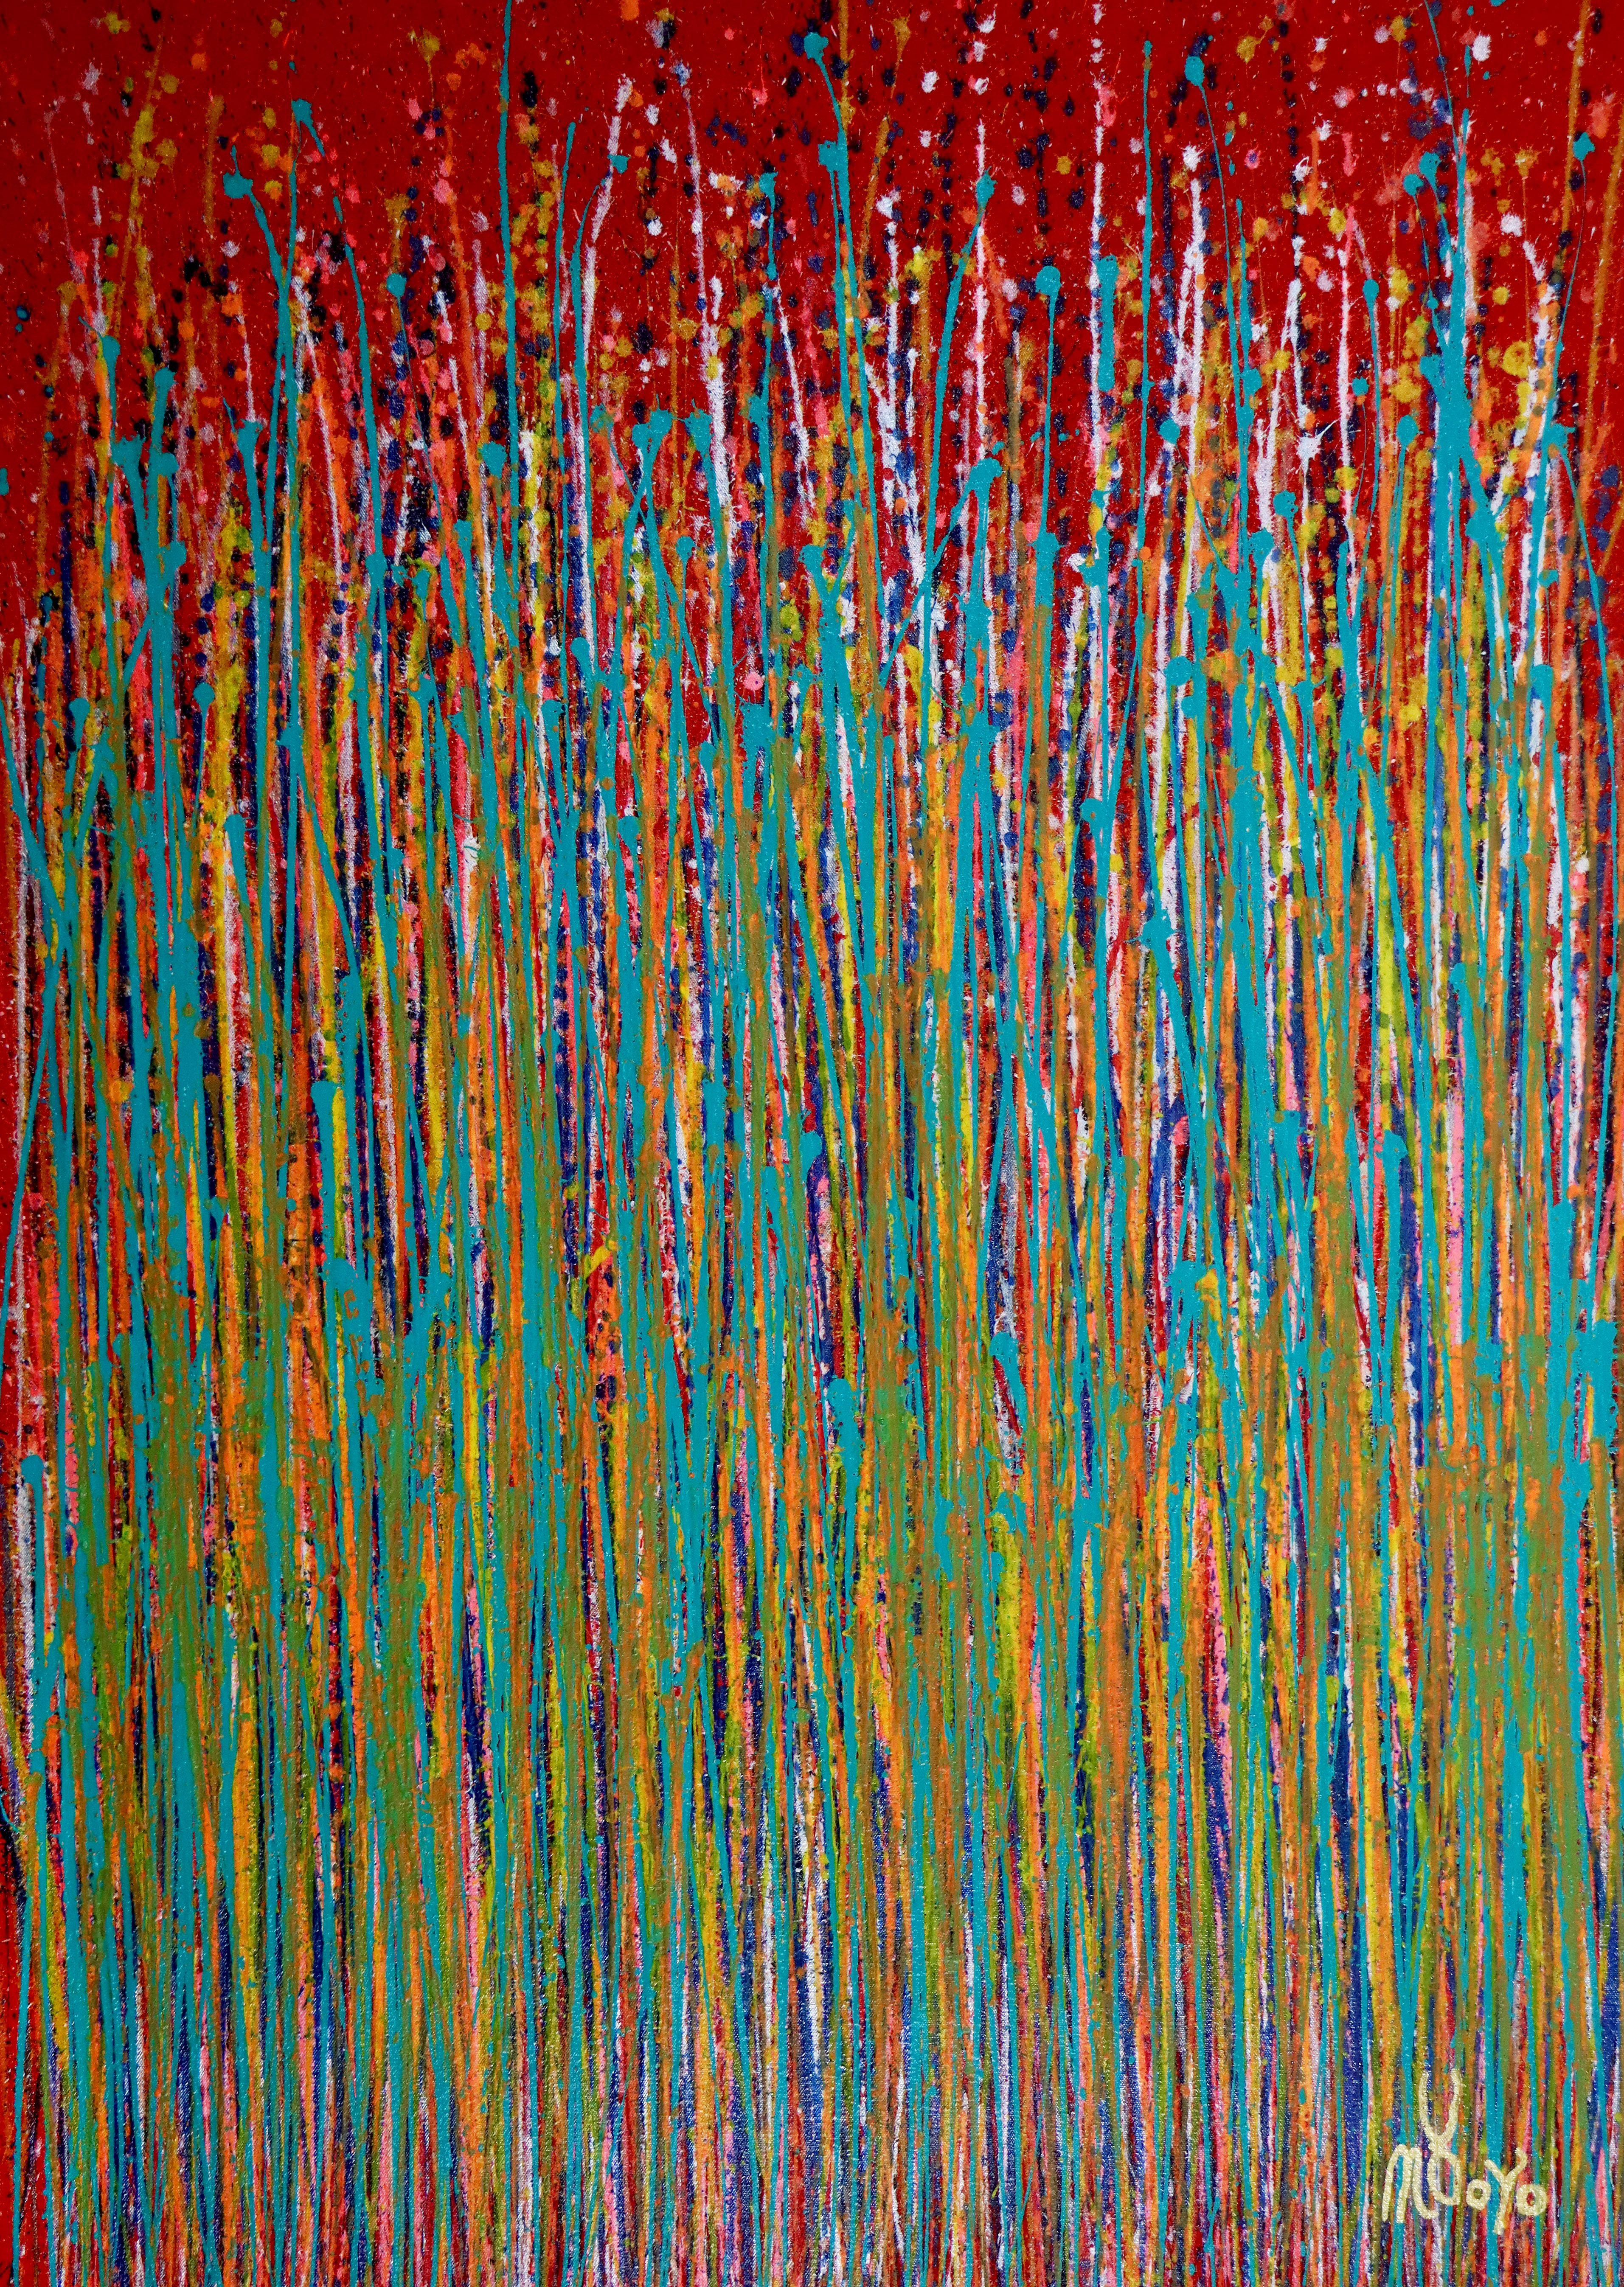 Nestor Toro Abstract Painting - Garden rhythm (Over Red), Painting, Acrylic on Canvas